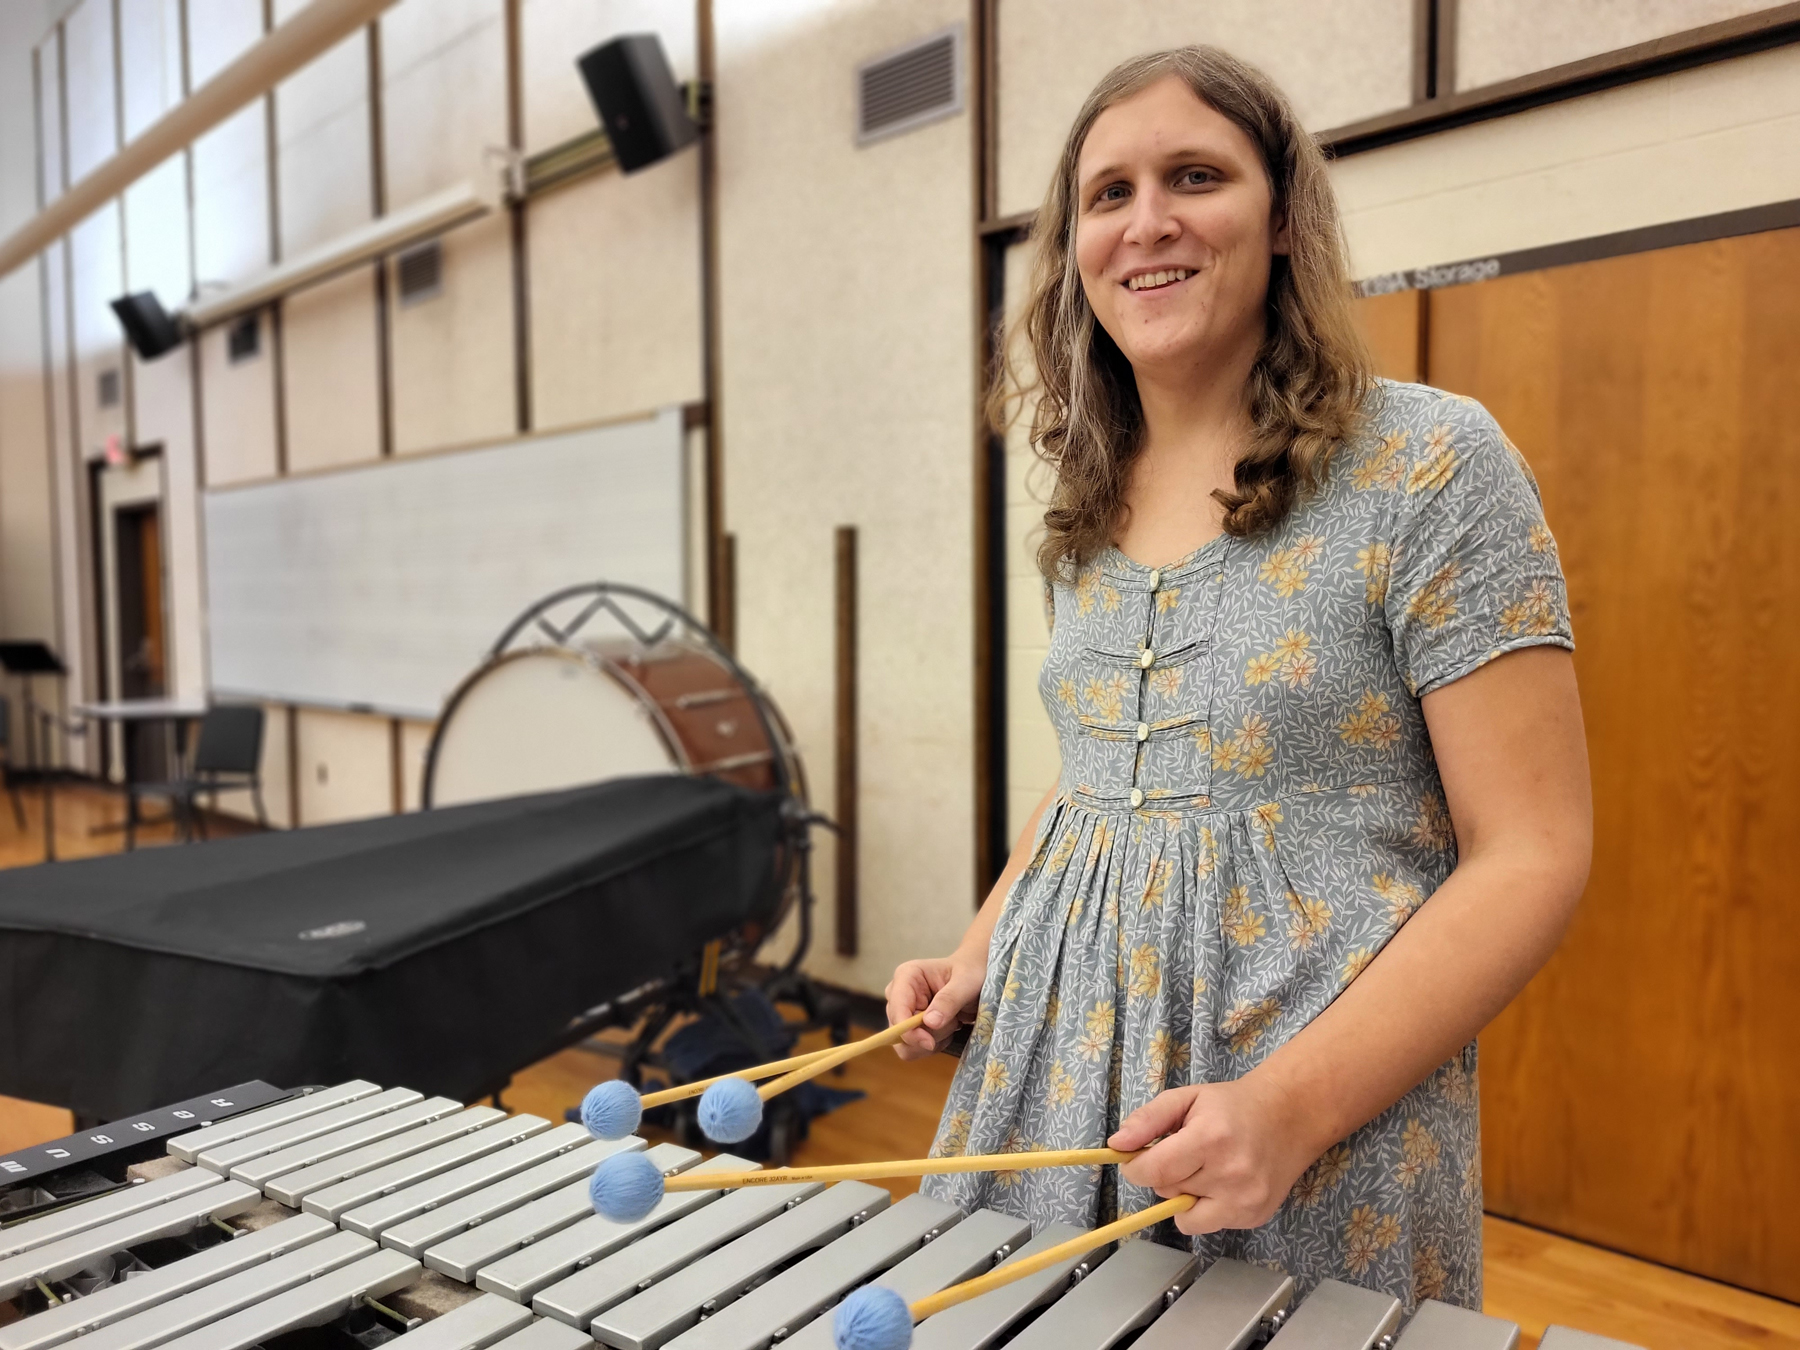 Joan Eason playing the vibraphone, holding mallets, smiling